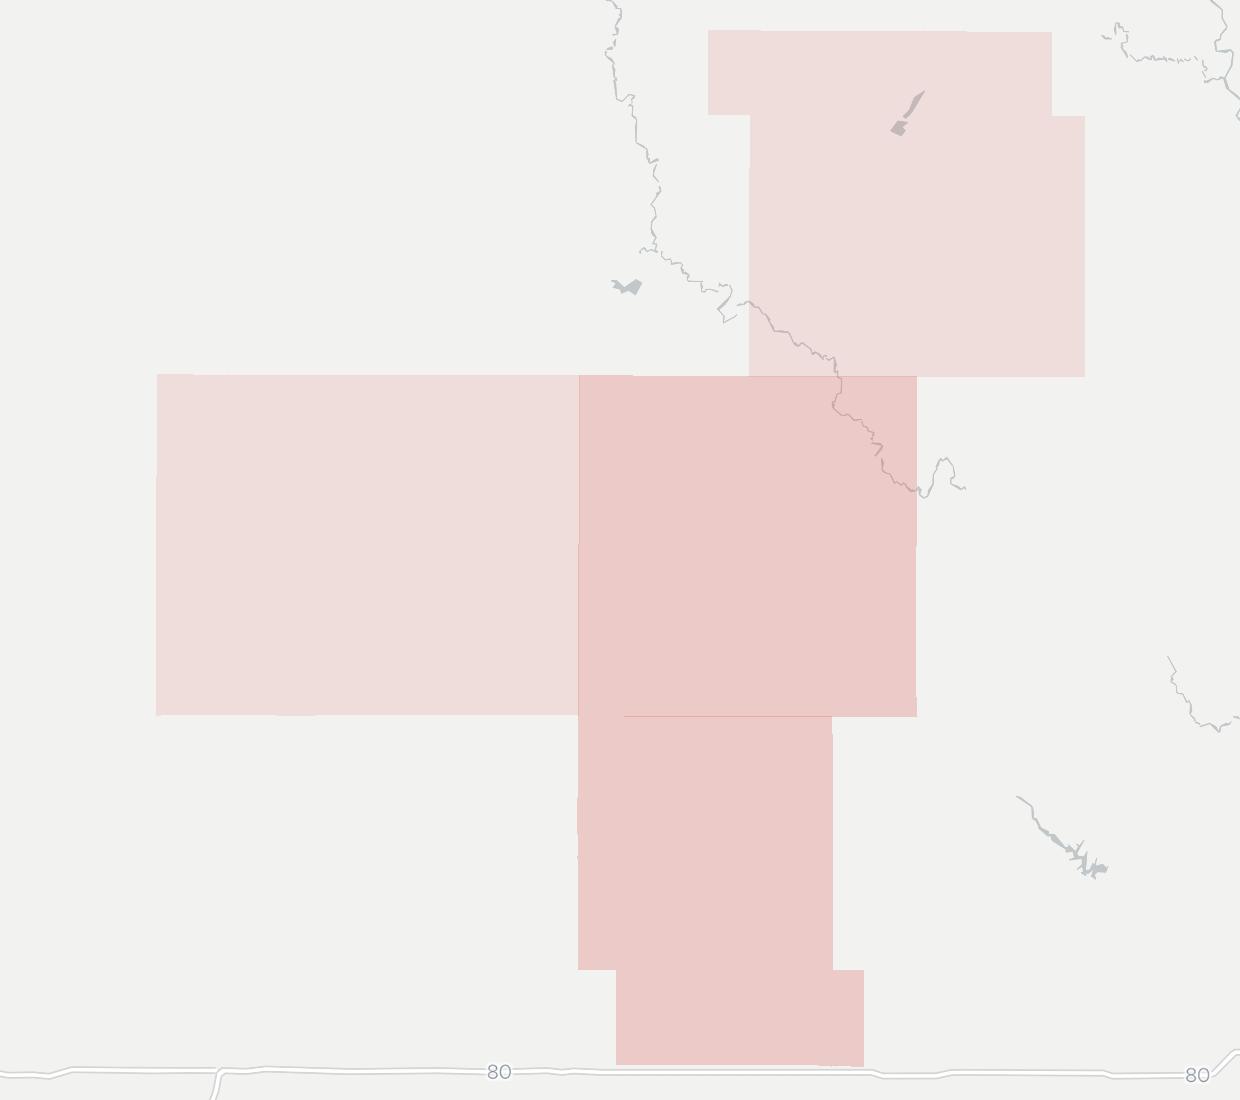 Manning Municipal Utilities Availability Map. Click for interactive map